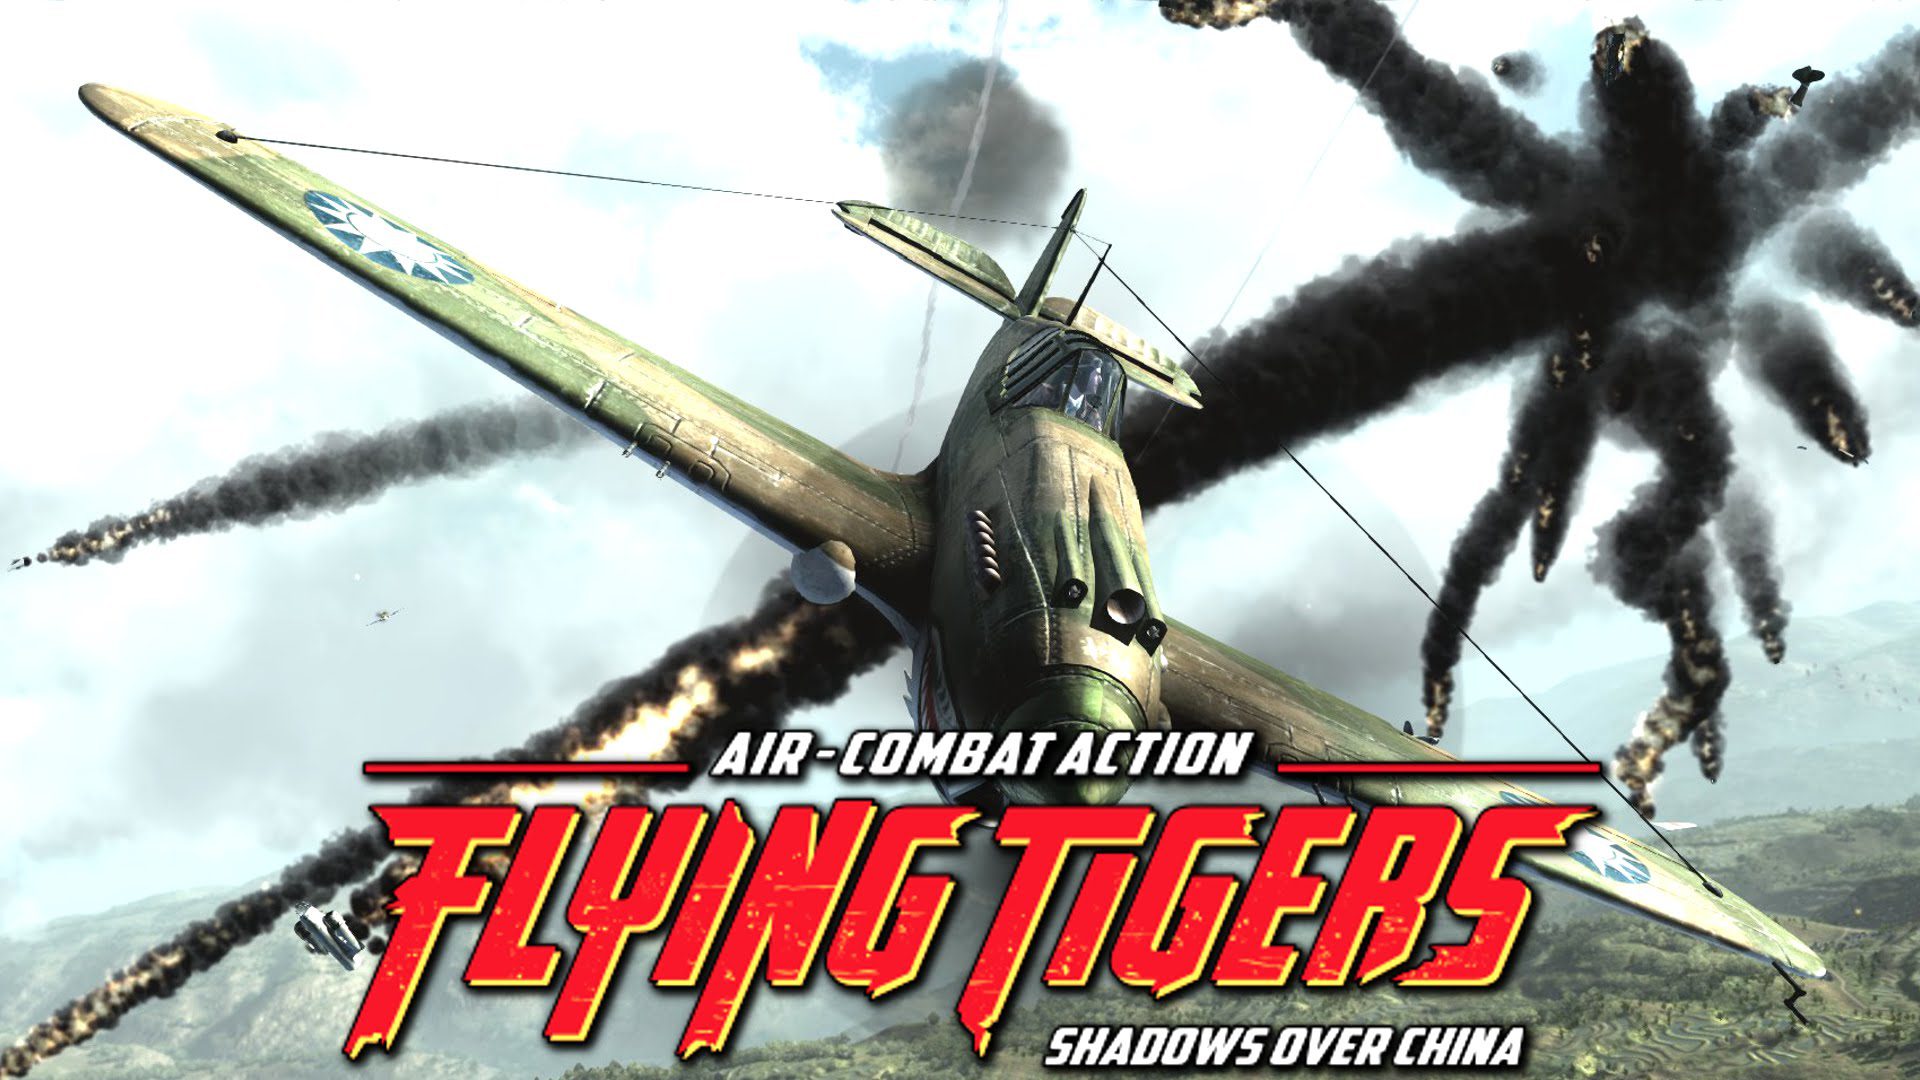 Flying Tigers: Shadows Over China 50% off on Xbox Store